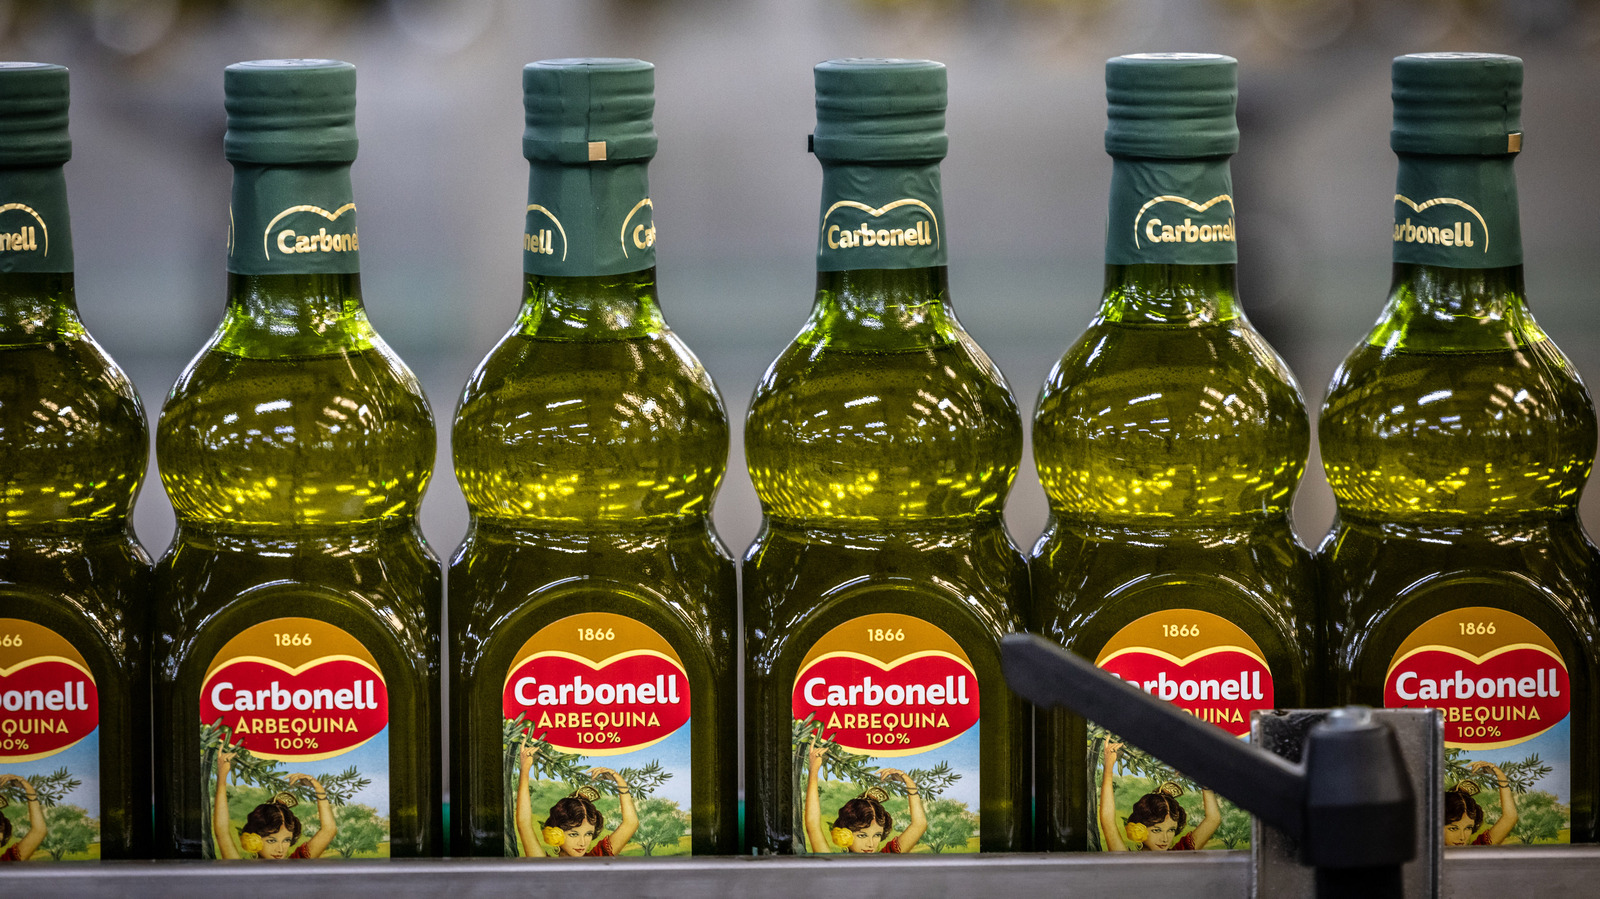 Fill Good - Did you know you can refill your olive oil bottles at